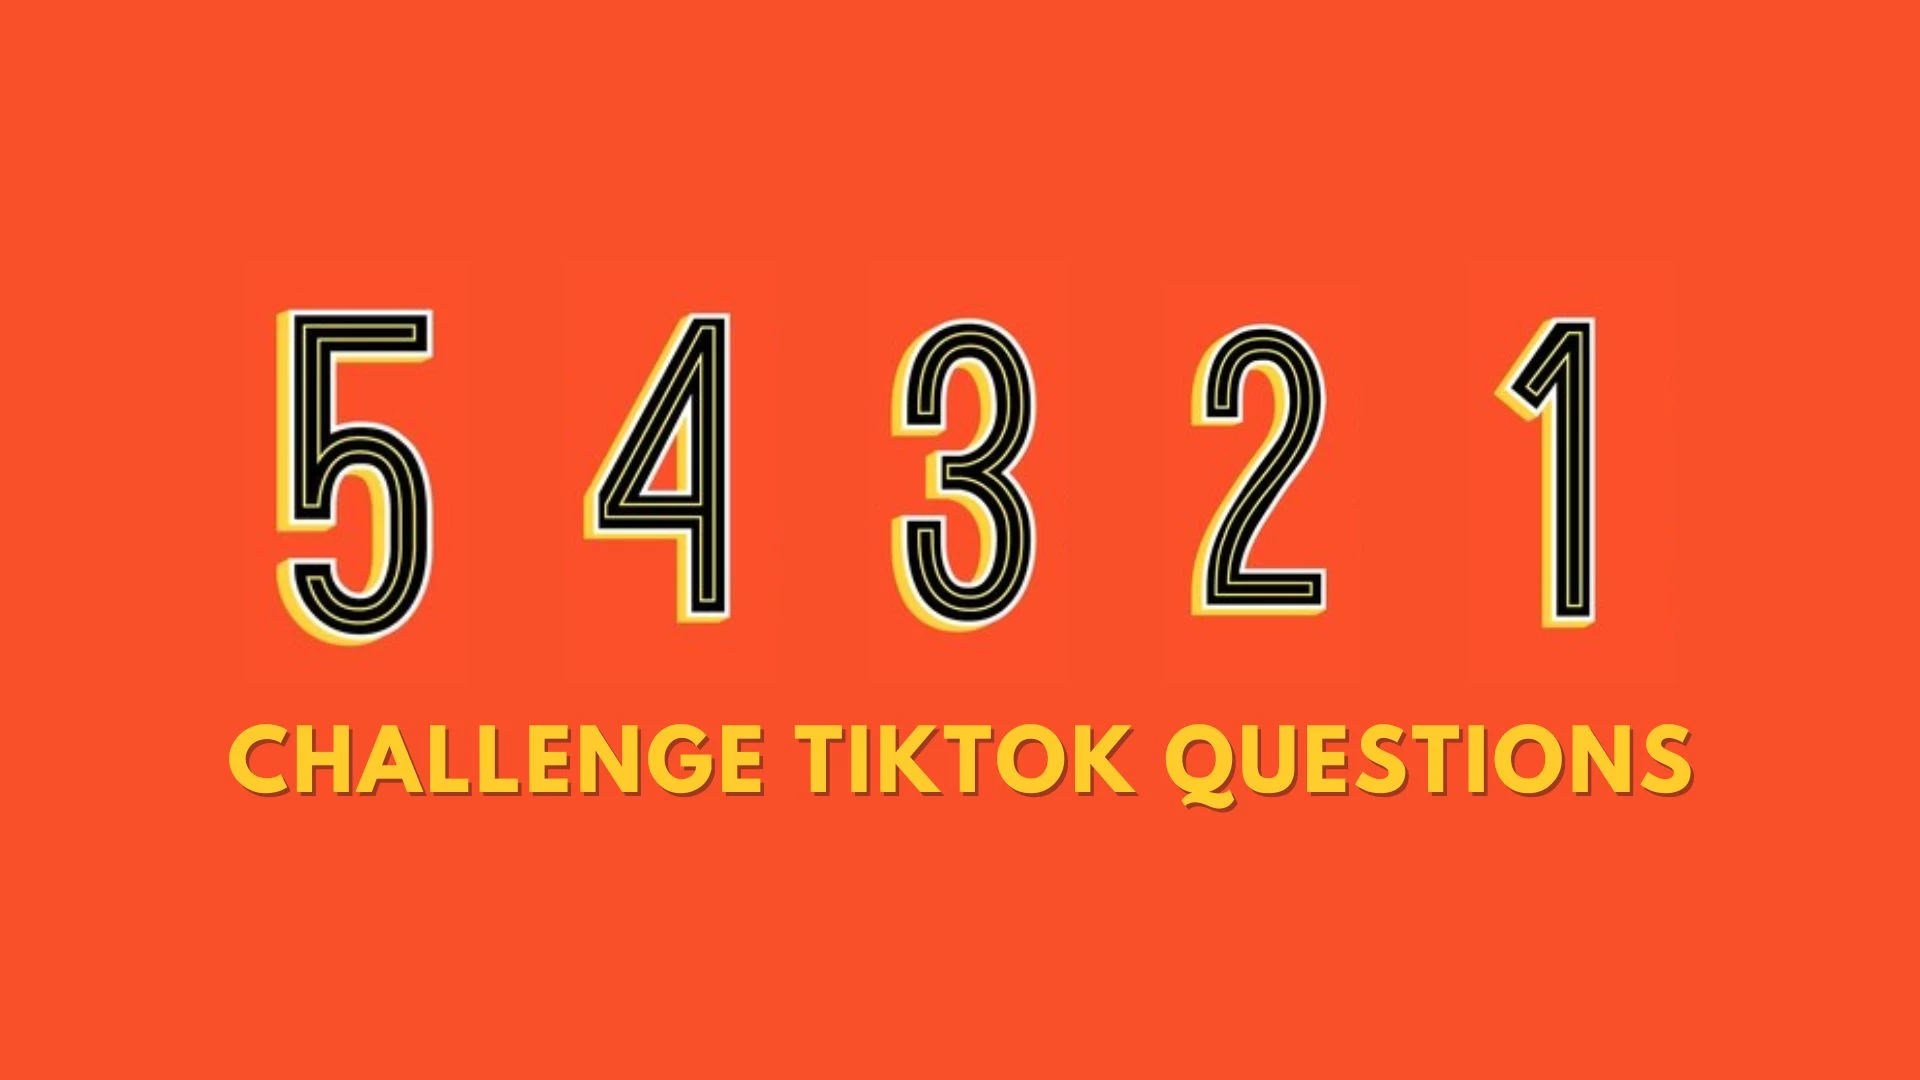 54321 Challenge Tiktok Questions, How to do the 54321 Challenge?